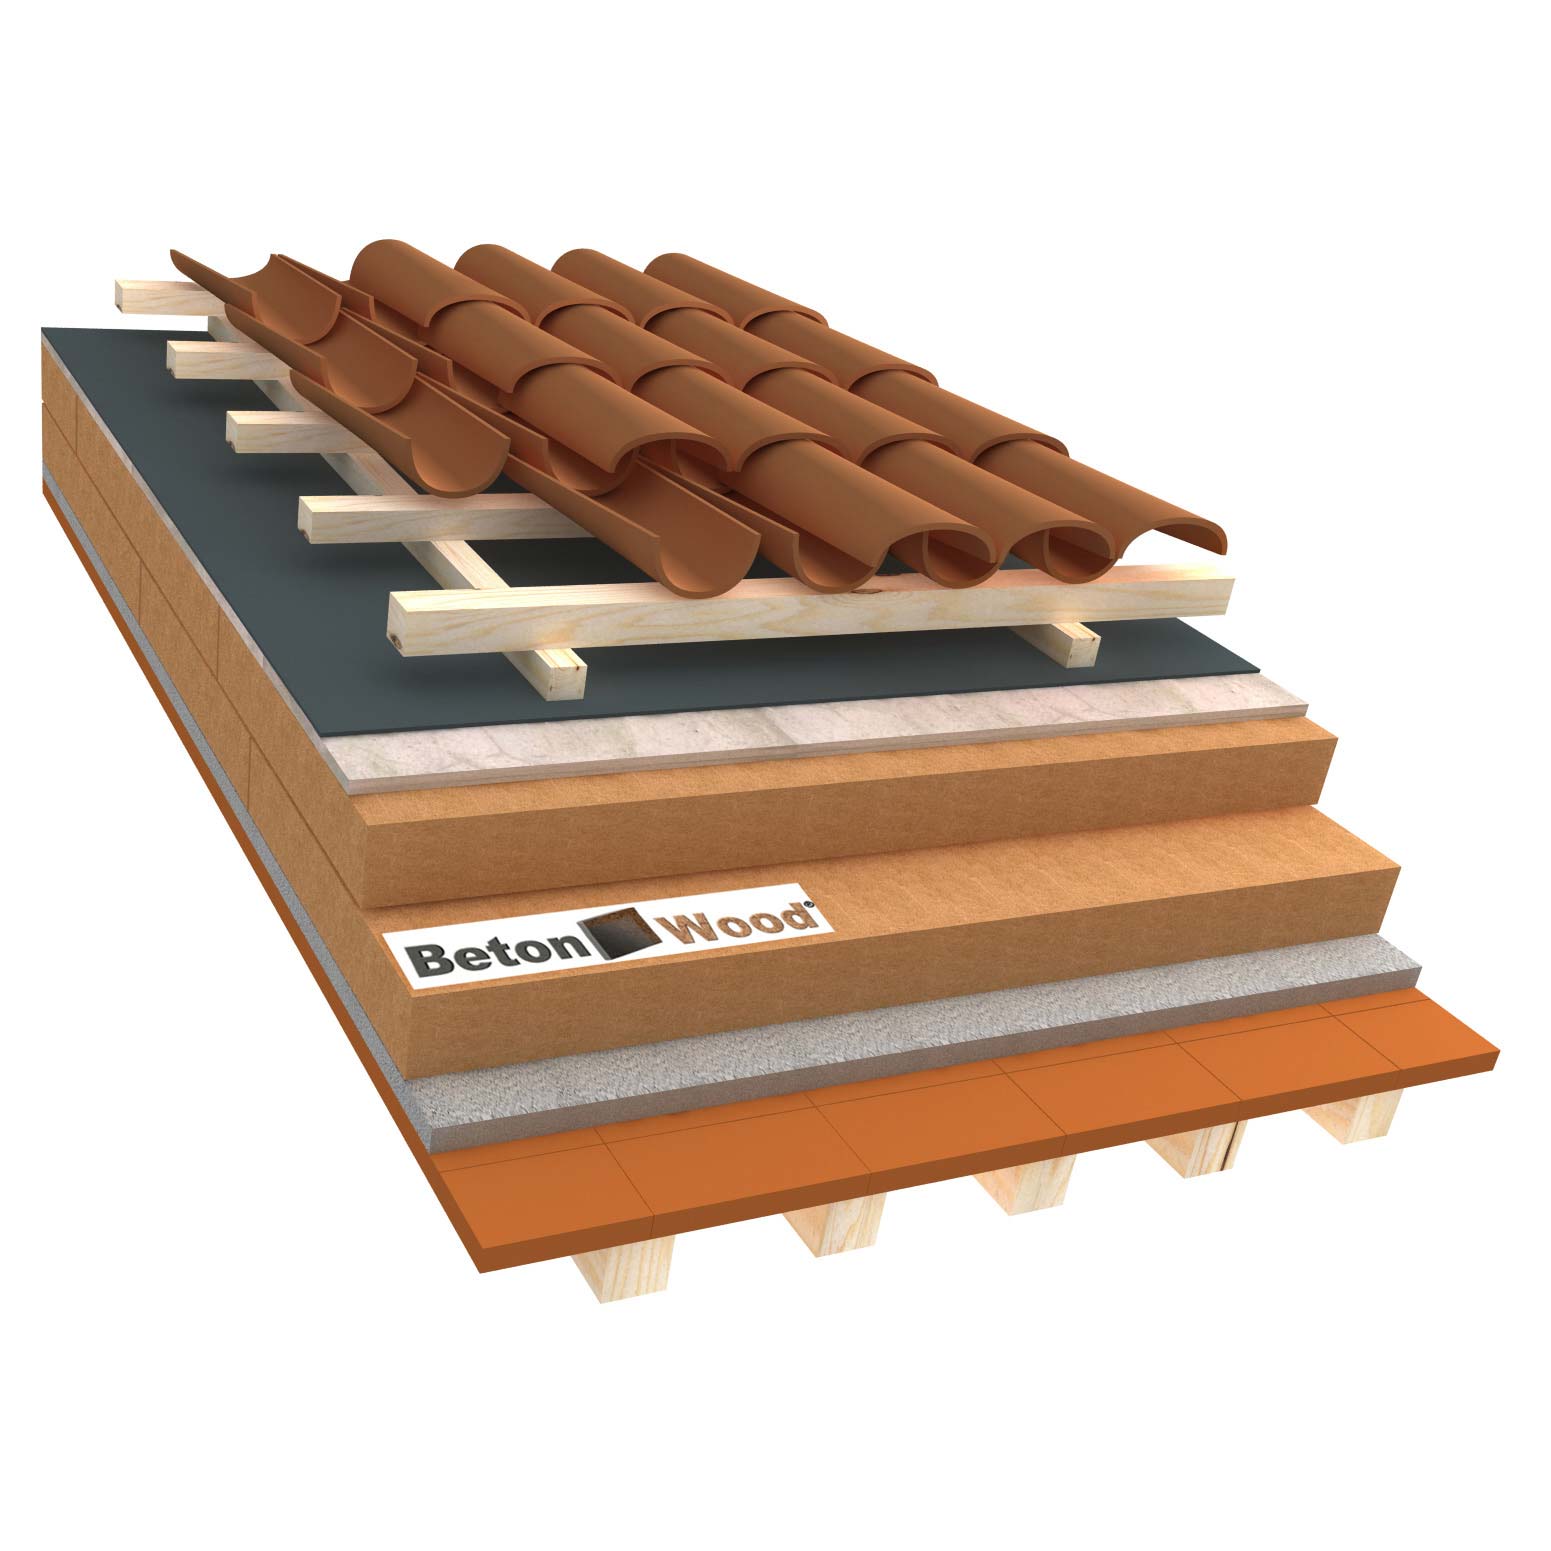 Ventilated roof with fiber wood Therm SD and cement bonded particle boards on terracotta tiles